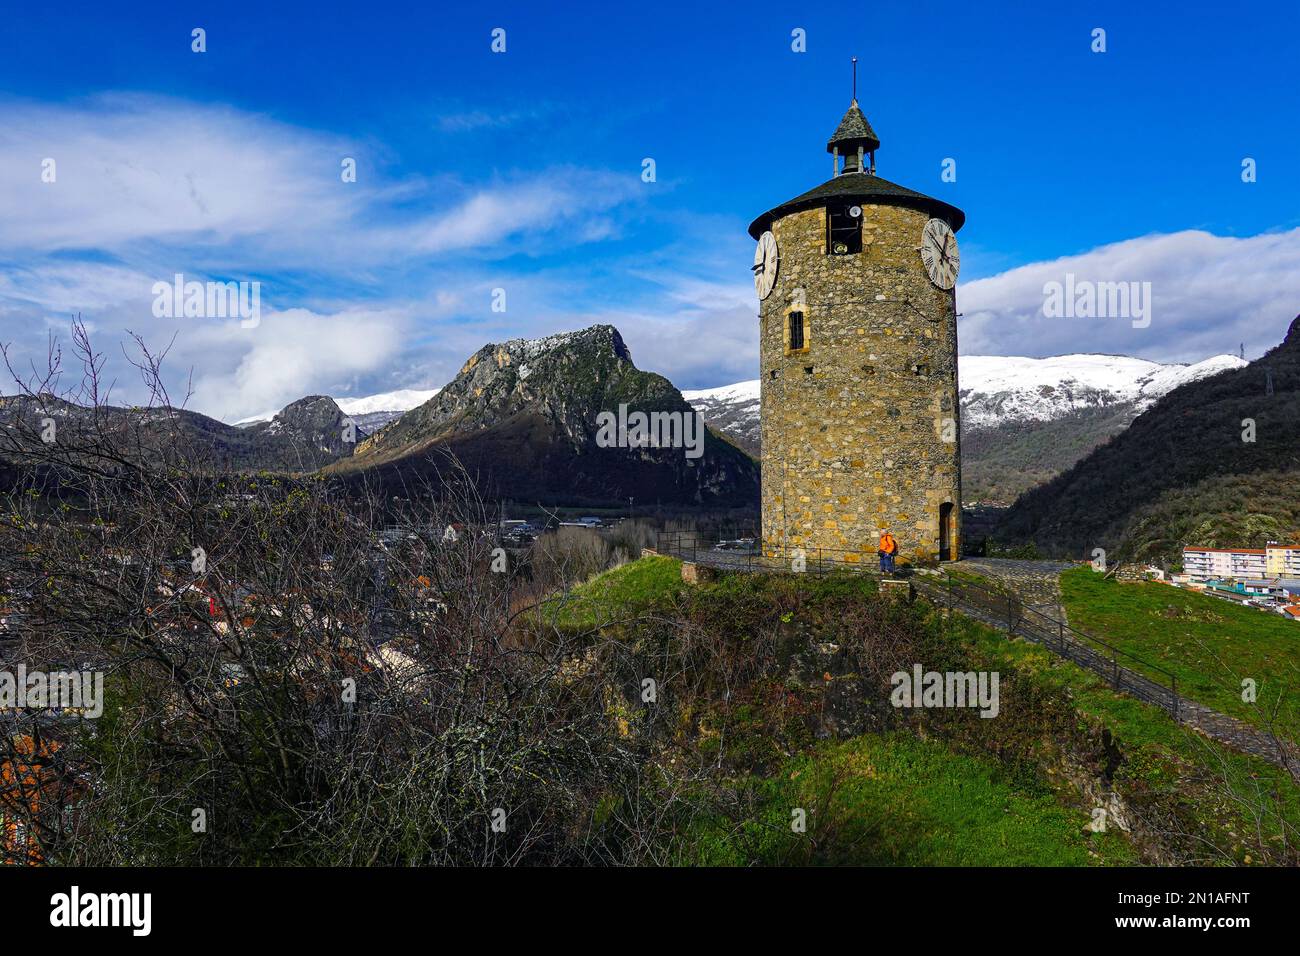 Clocktower above in Tarascon sur Ariege, French Pyrenees, The Ariege, France with snowy mountains Stock Photo